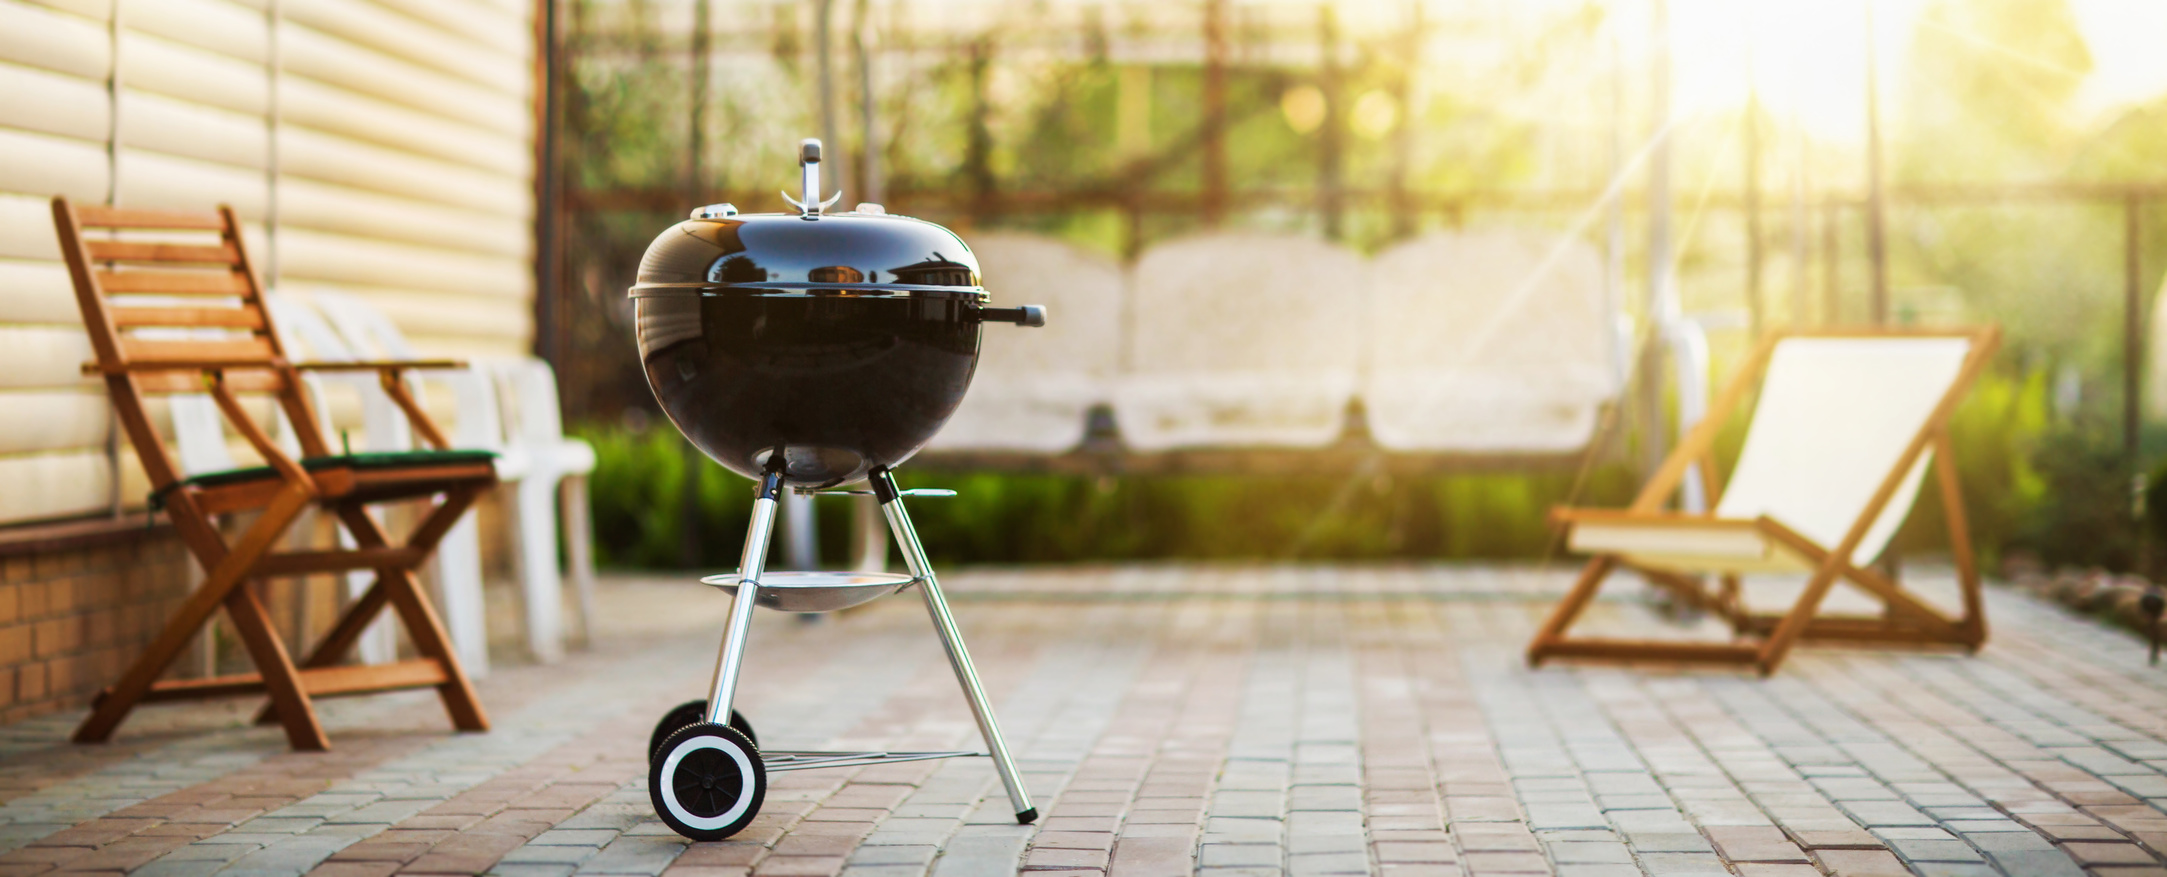 Grilling Season Done Right With Weber